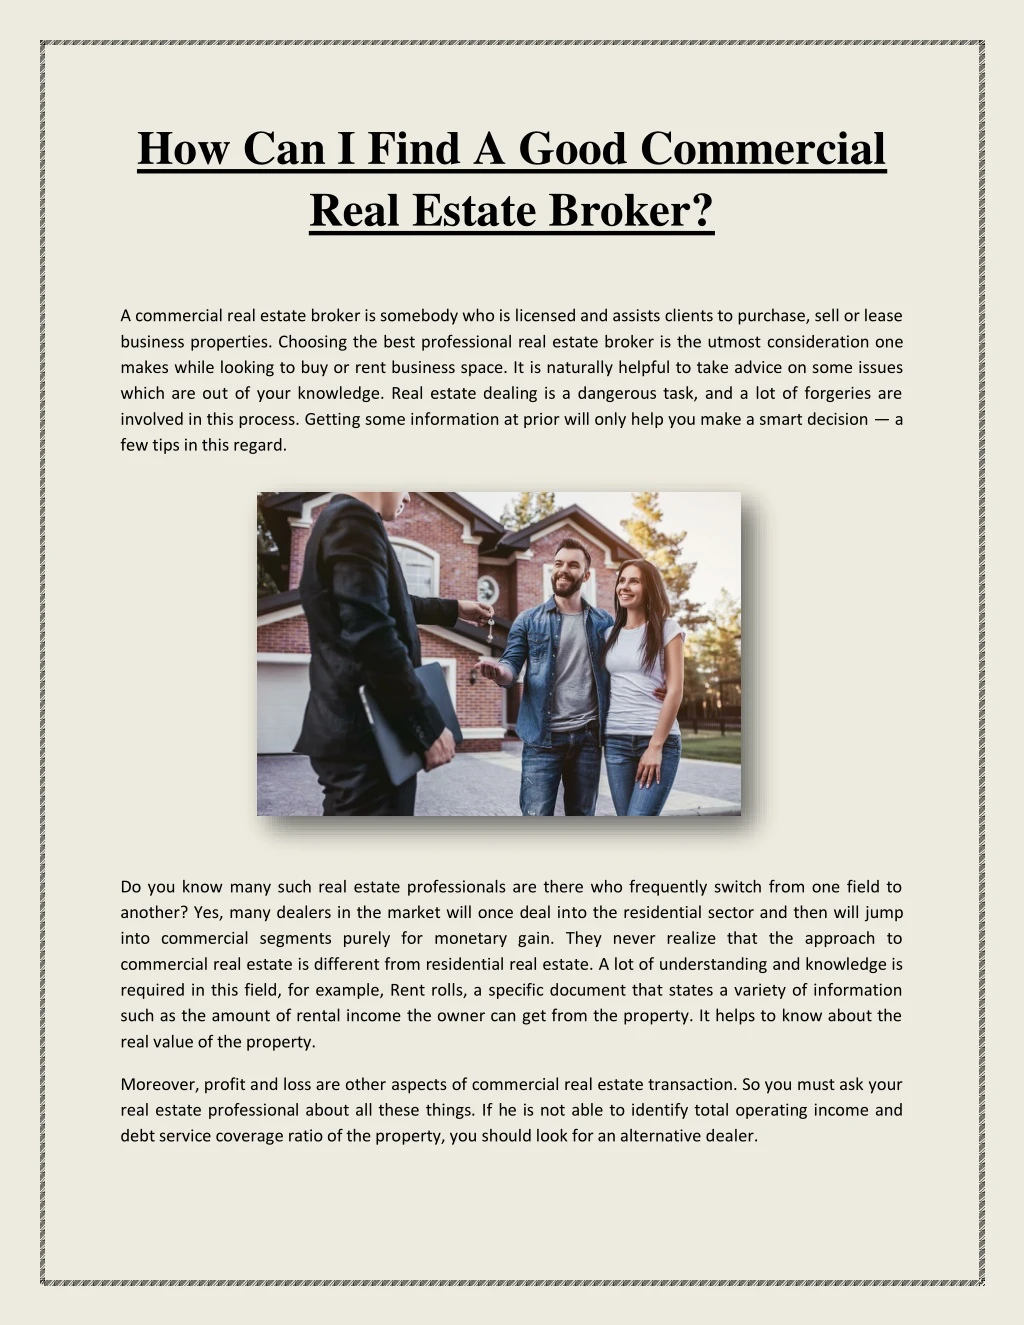 how can i find a good commercial real estate